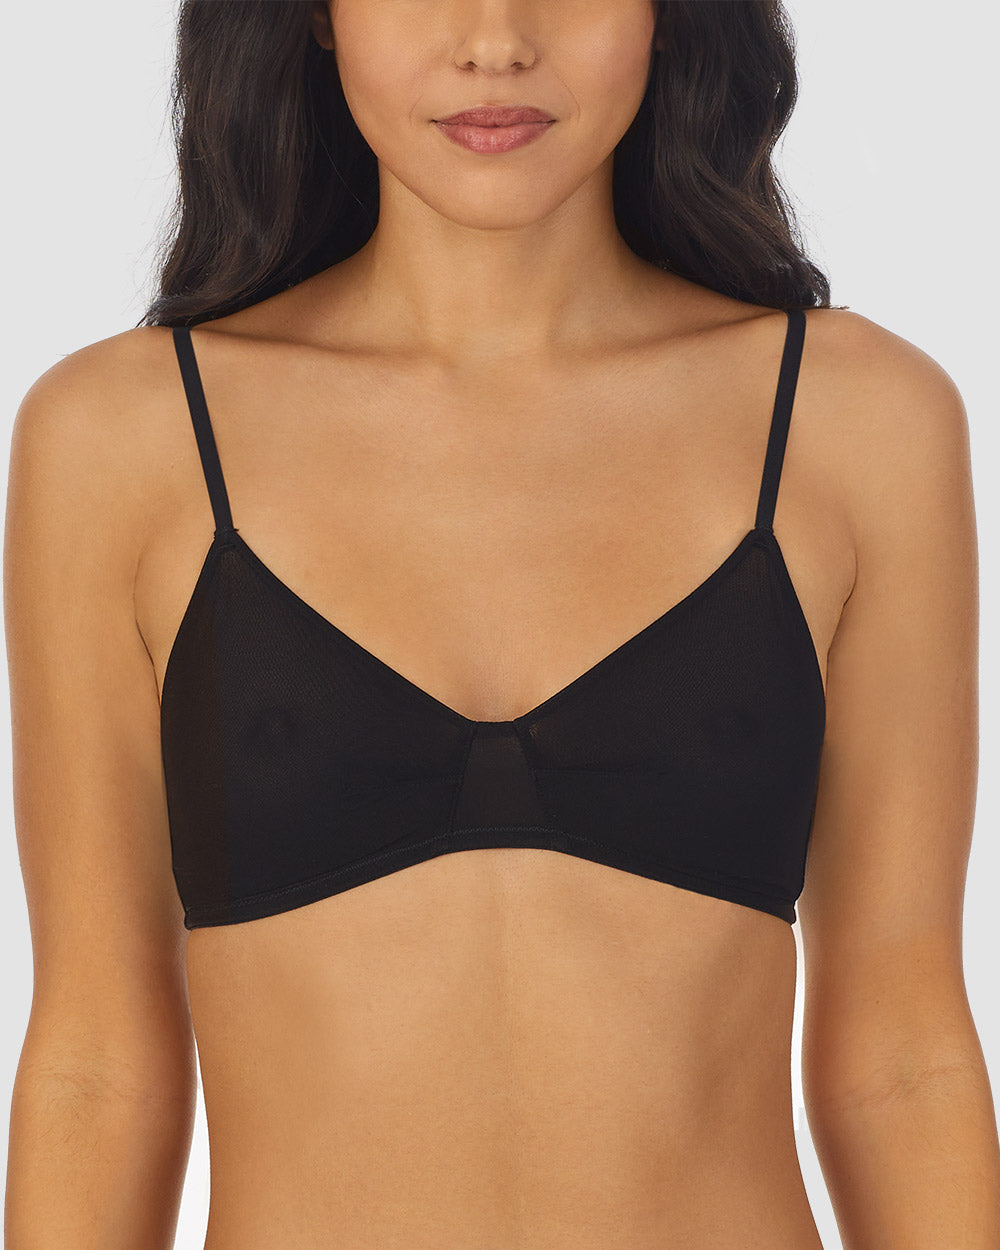 A lady wearing black Next to Nothing Bralette